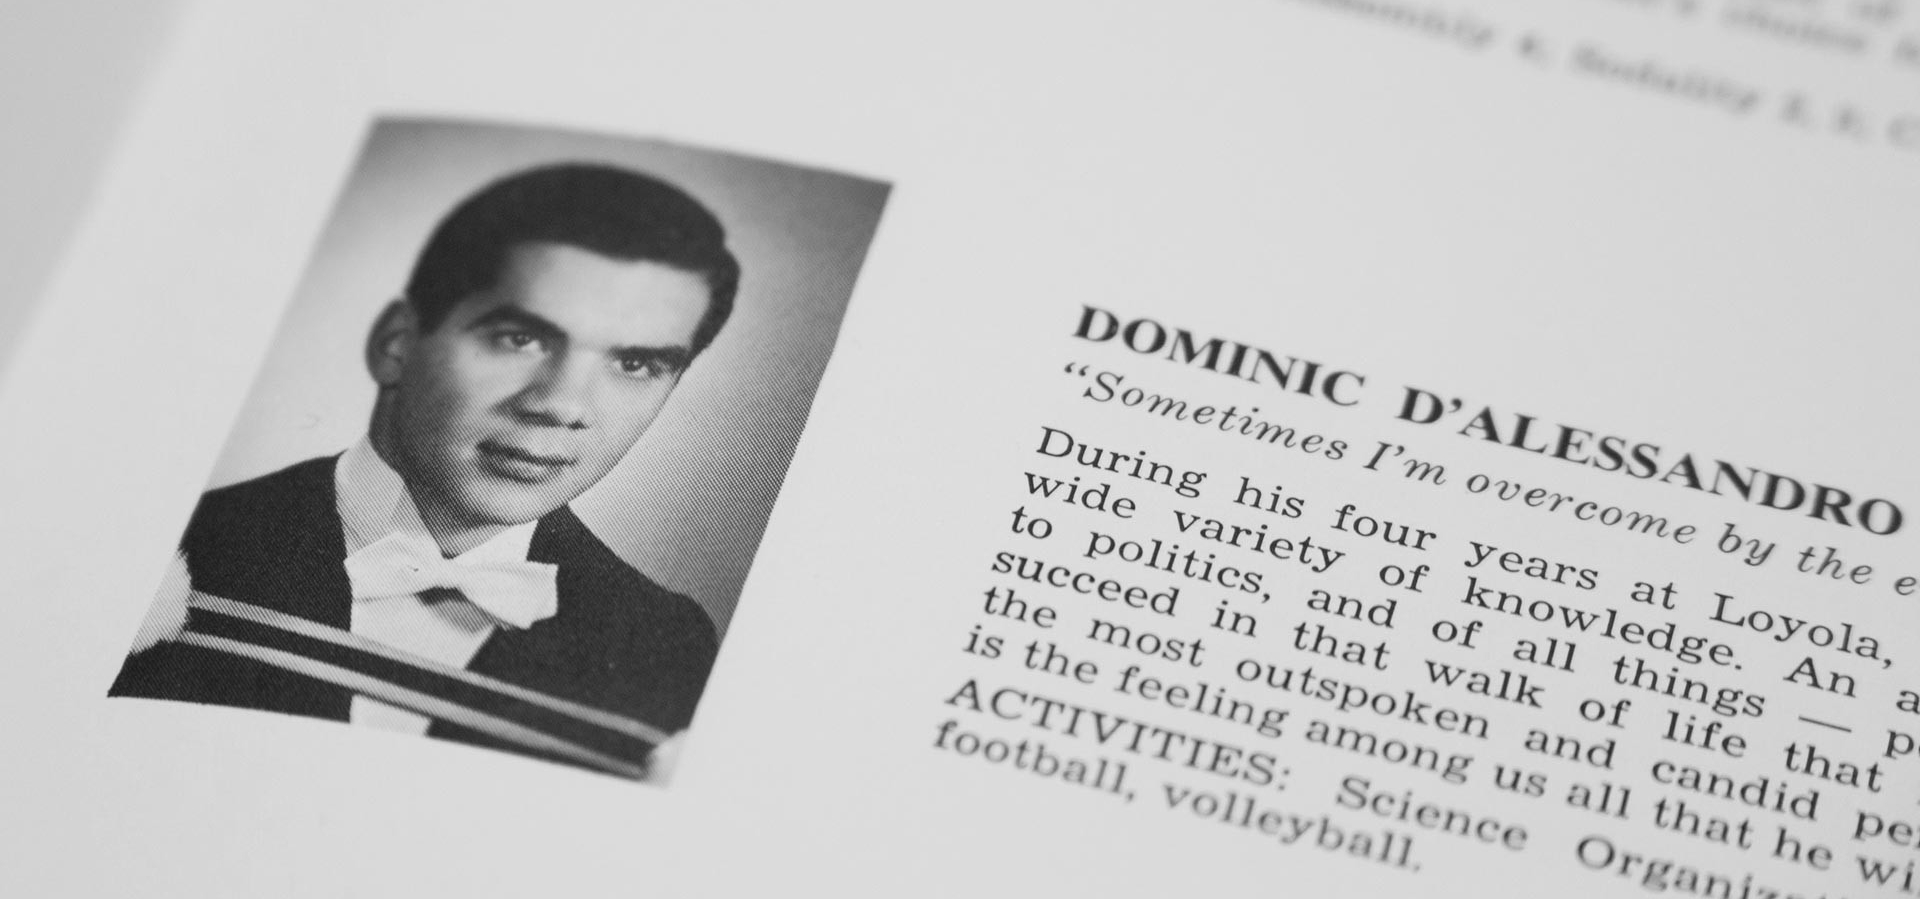 Dominic D’Alessandro’s 1967 Loyola College yearbook photo.